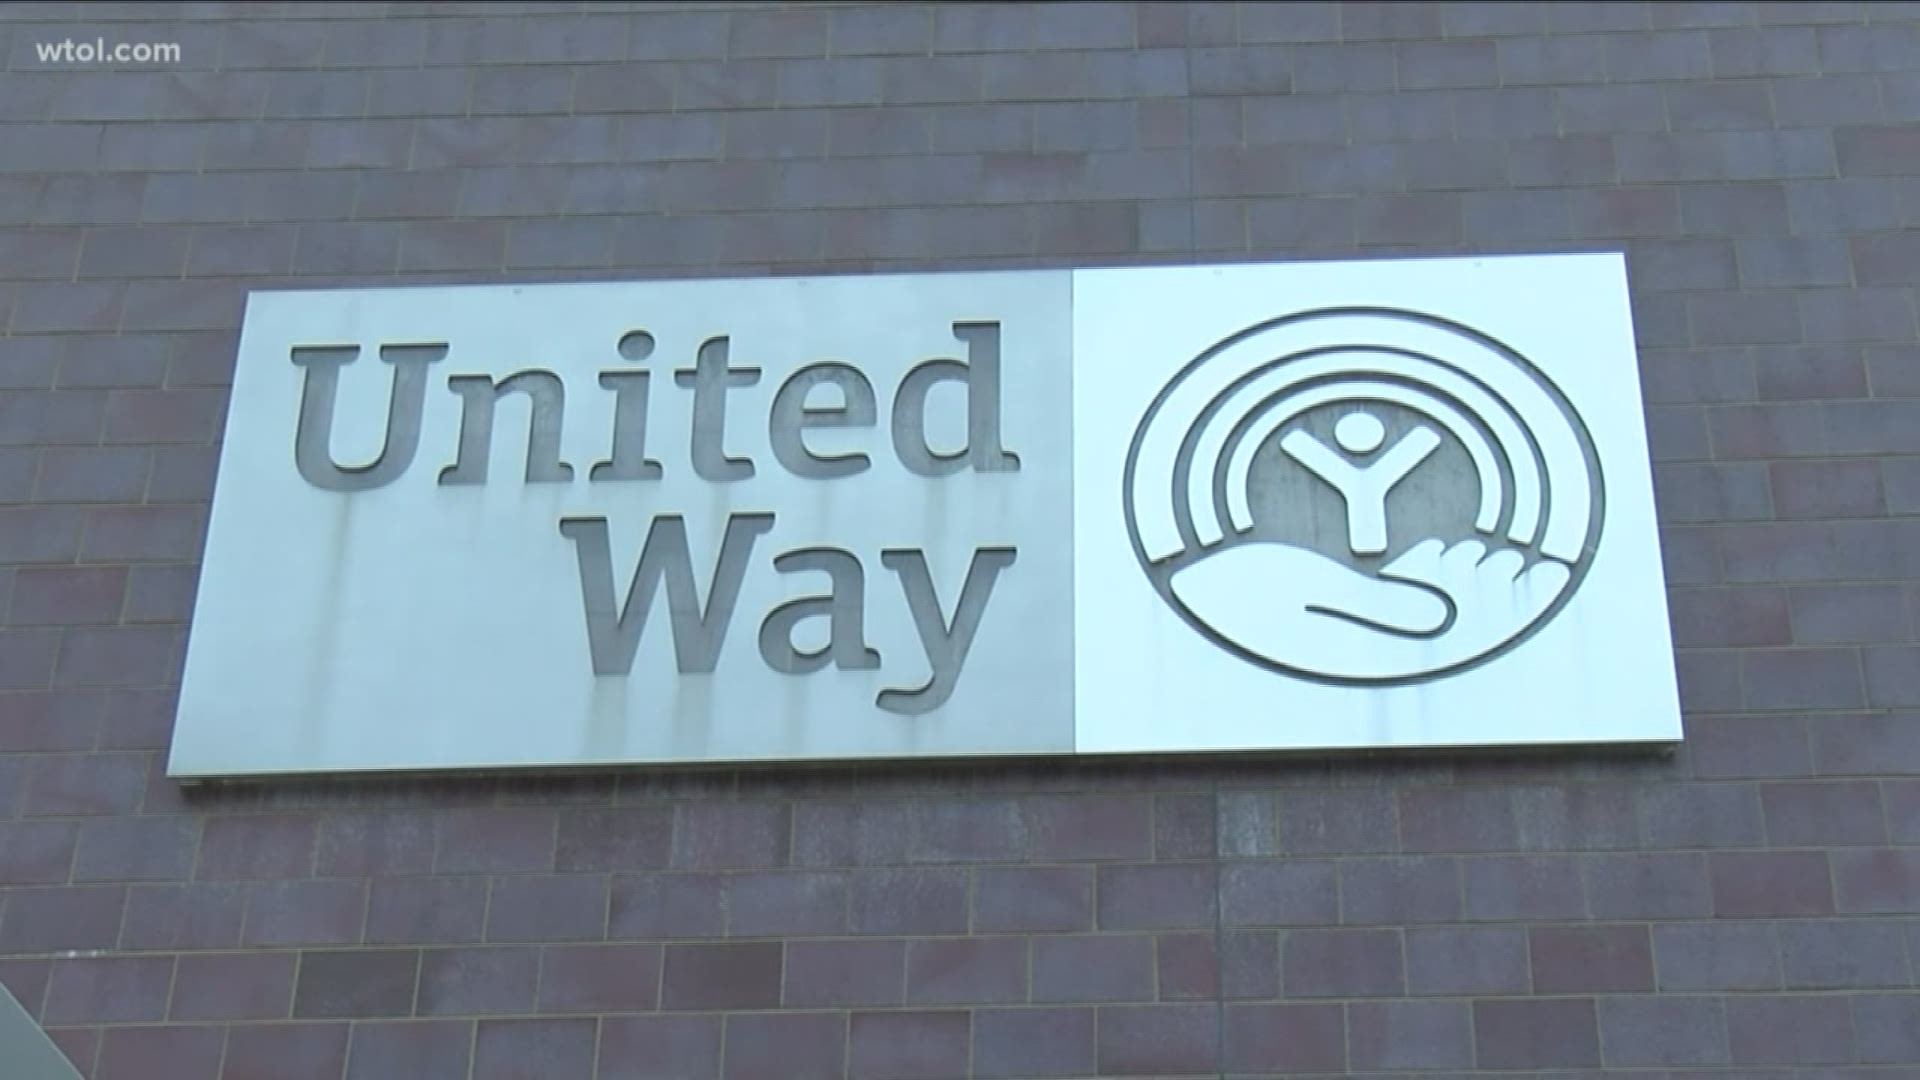 The United Way Emergency Response Fund, 2020 is designed to address specific needs of families and others in the community.